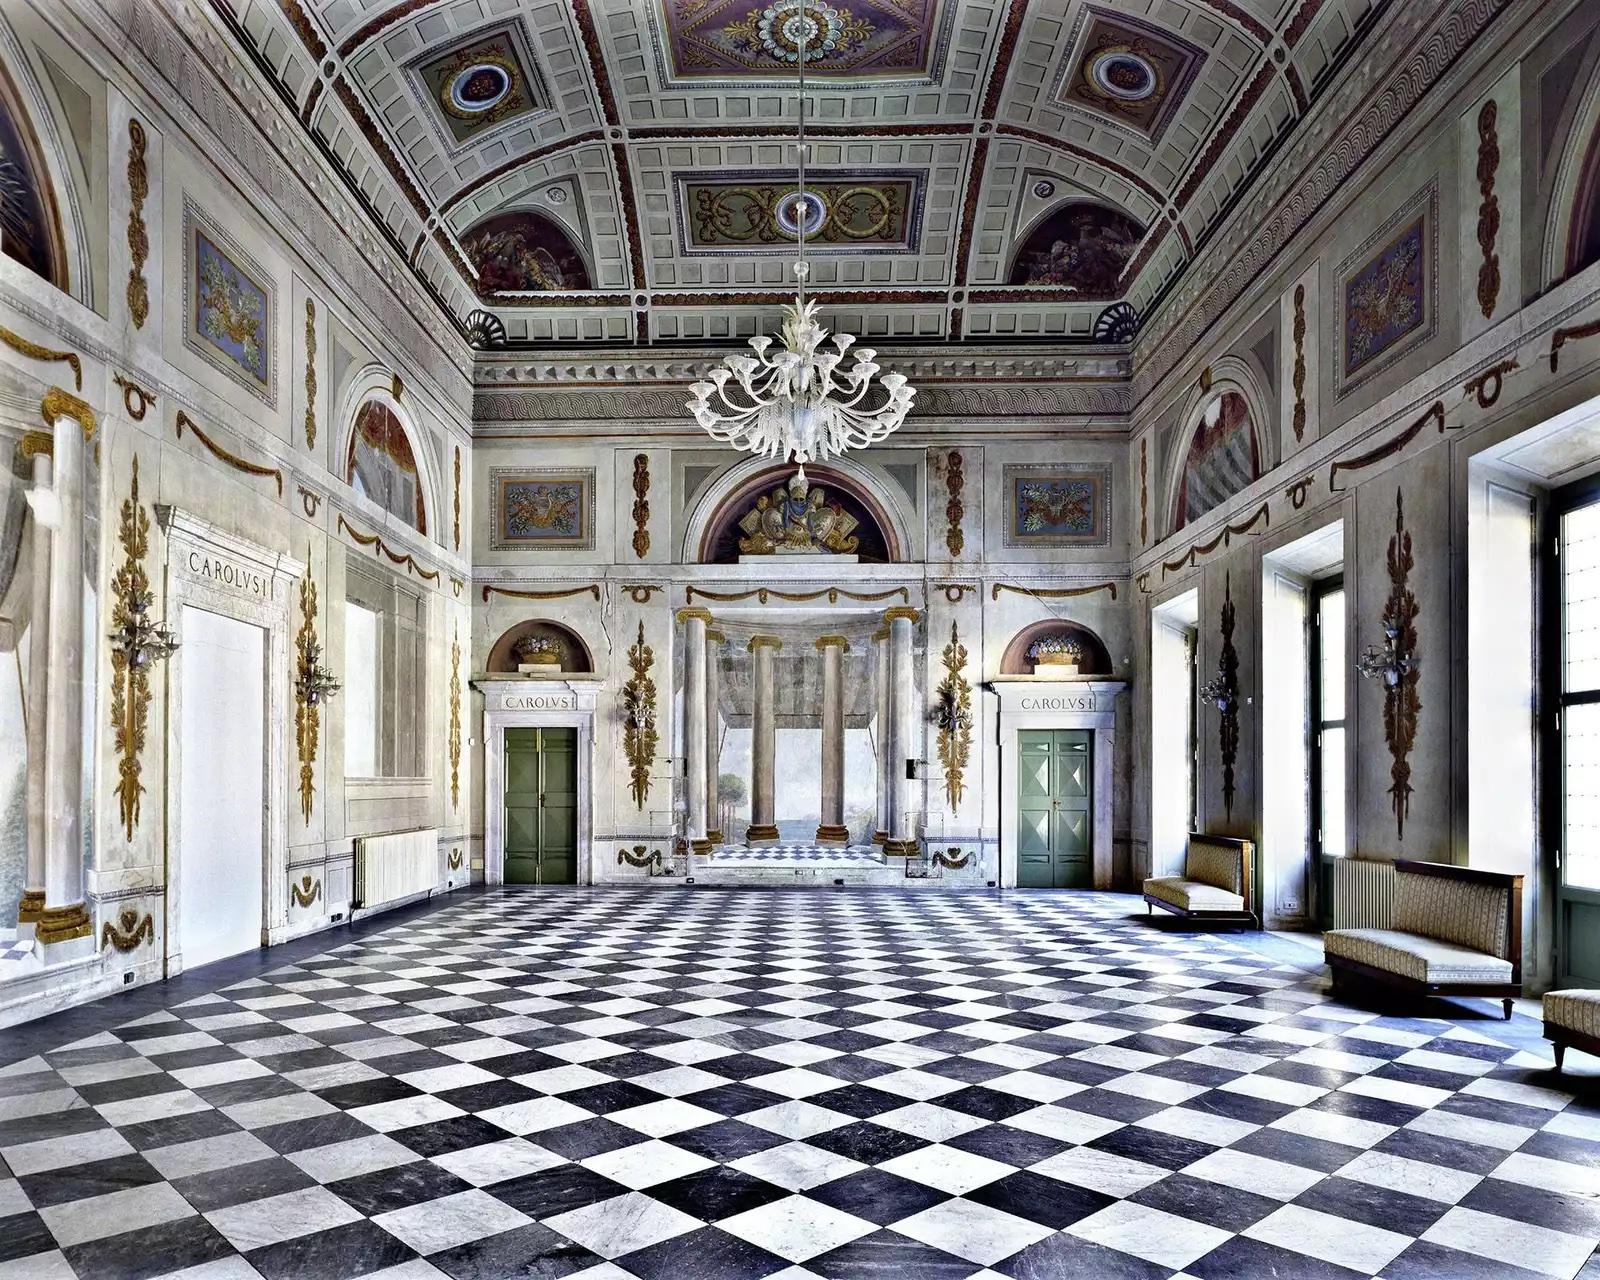 Palazzo Ducale, Massa, Italy, 1999
Chromogenic print
100 x 120 cm
Edition of 5

Italian, b. 1954, Florence, Italy, based in Florence, Italy Massimo Listri travels his native Italy and the world with his camera, photographing grand interior spaces